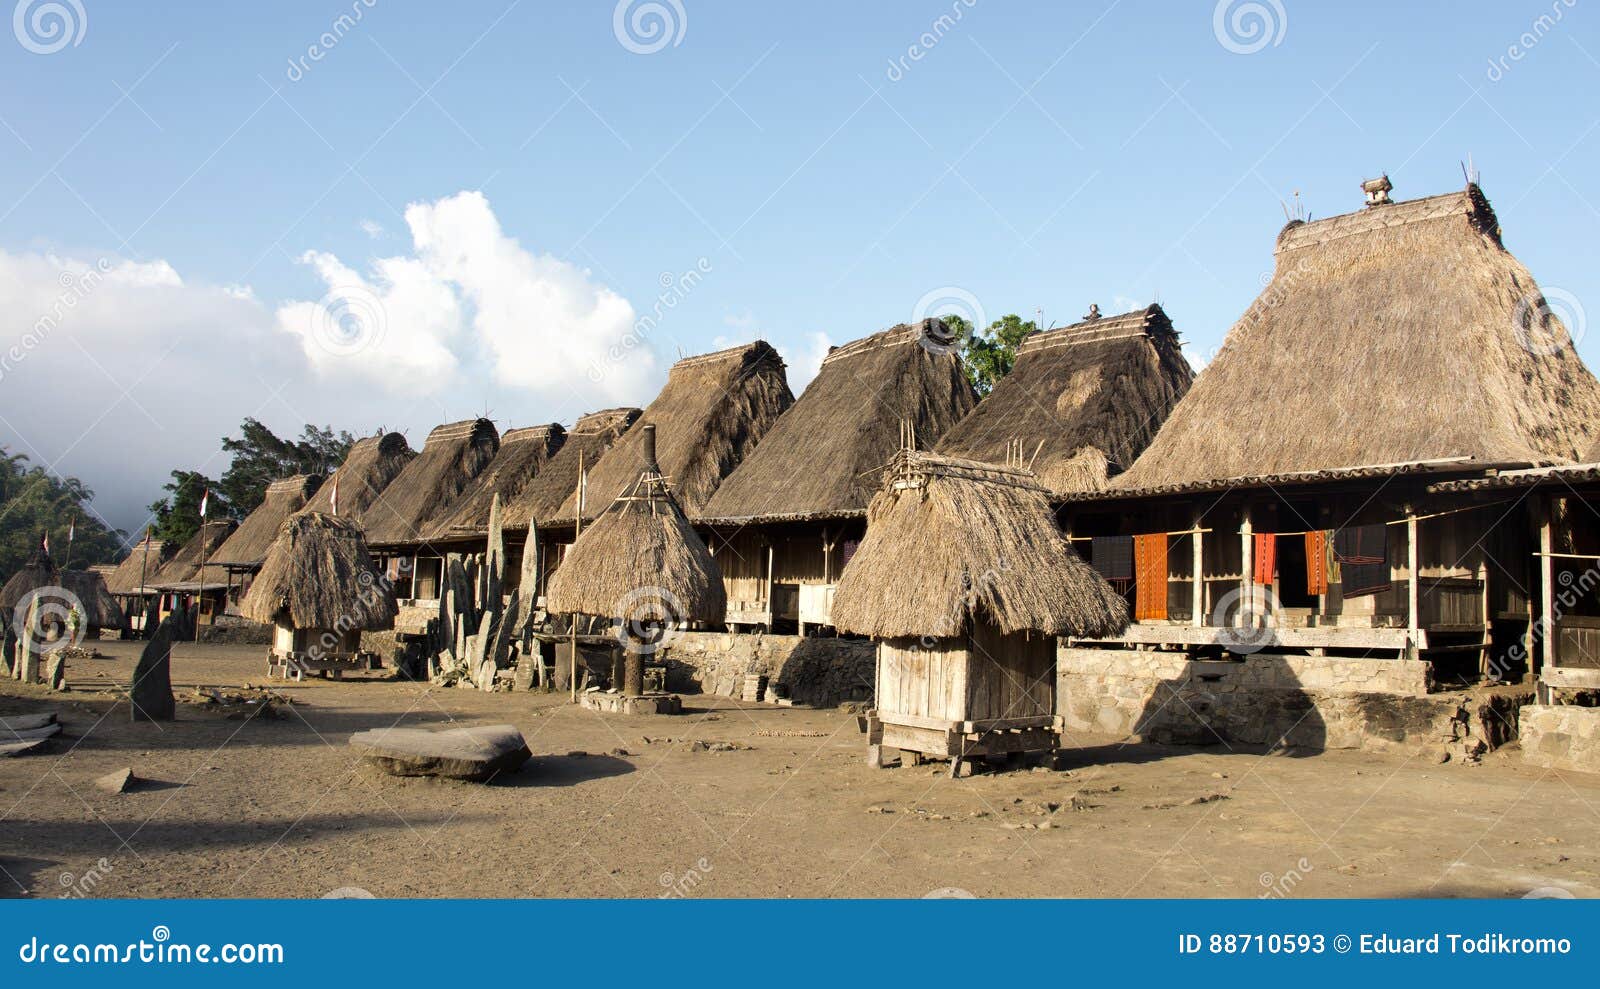 bena a traditional village with grass huts of the ngada people in flores.